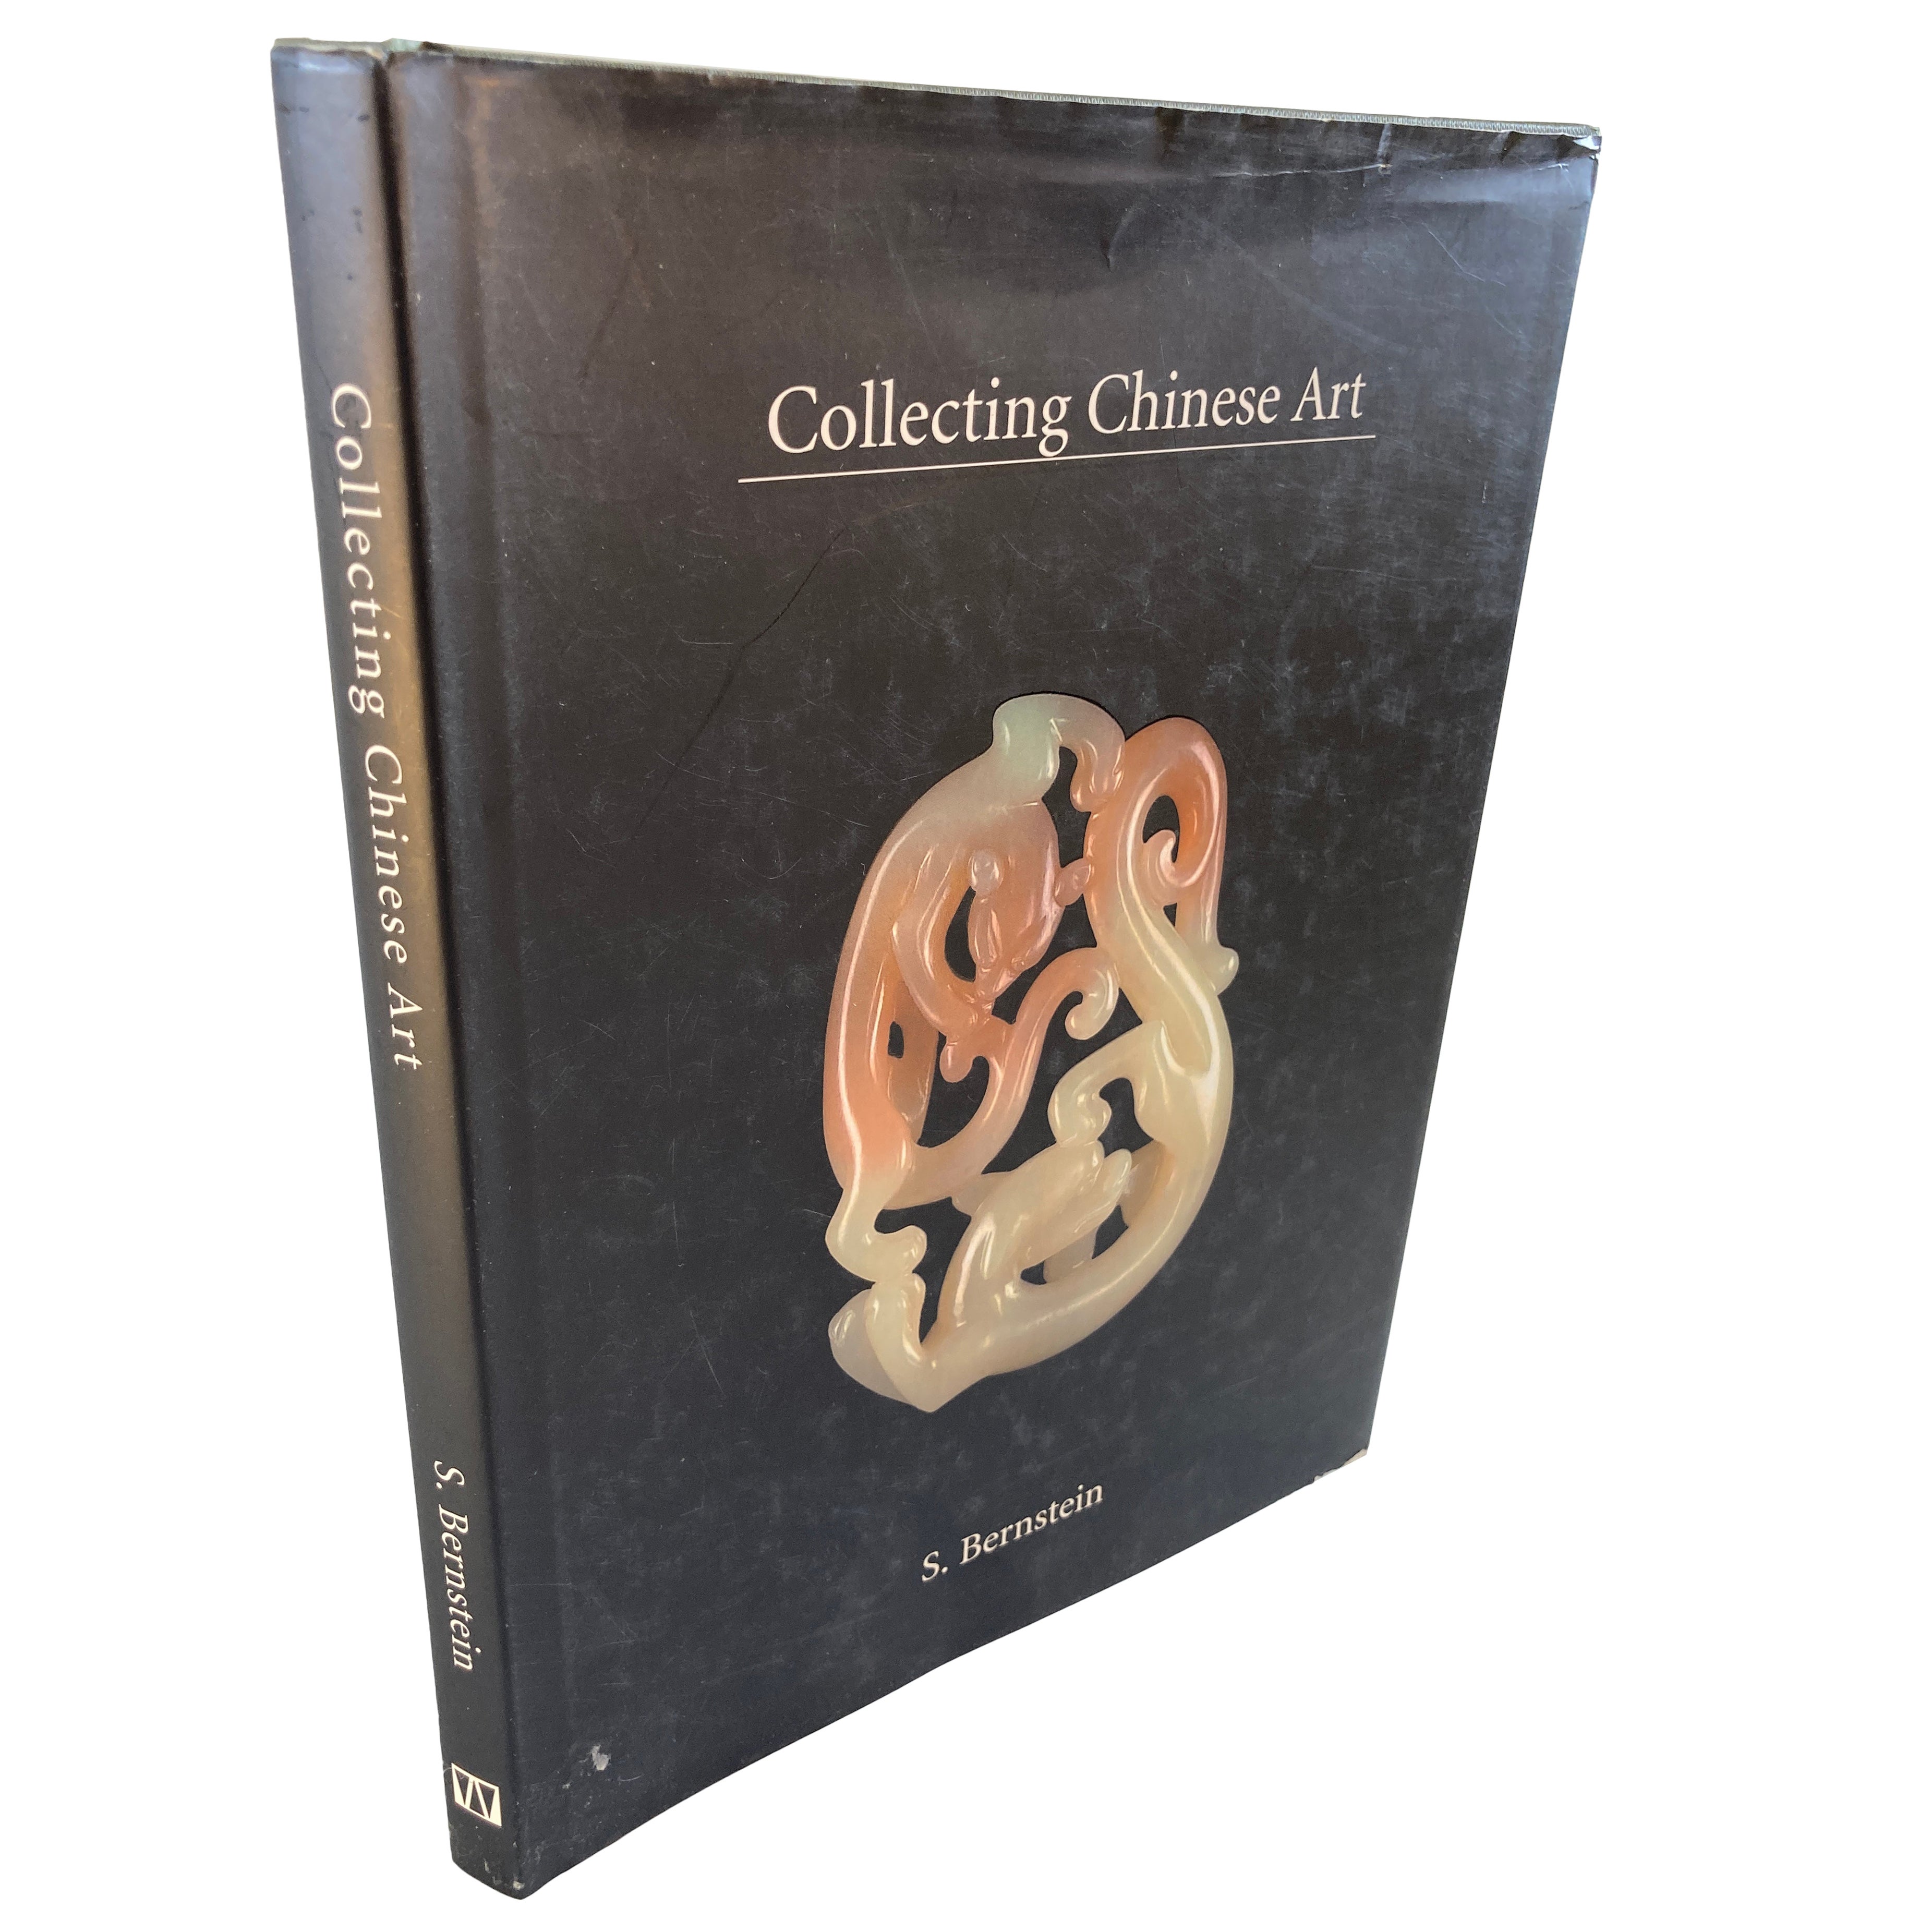 Collecting Chinese Art Book by Sam Bernstein For Sale